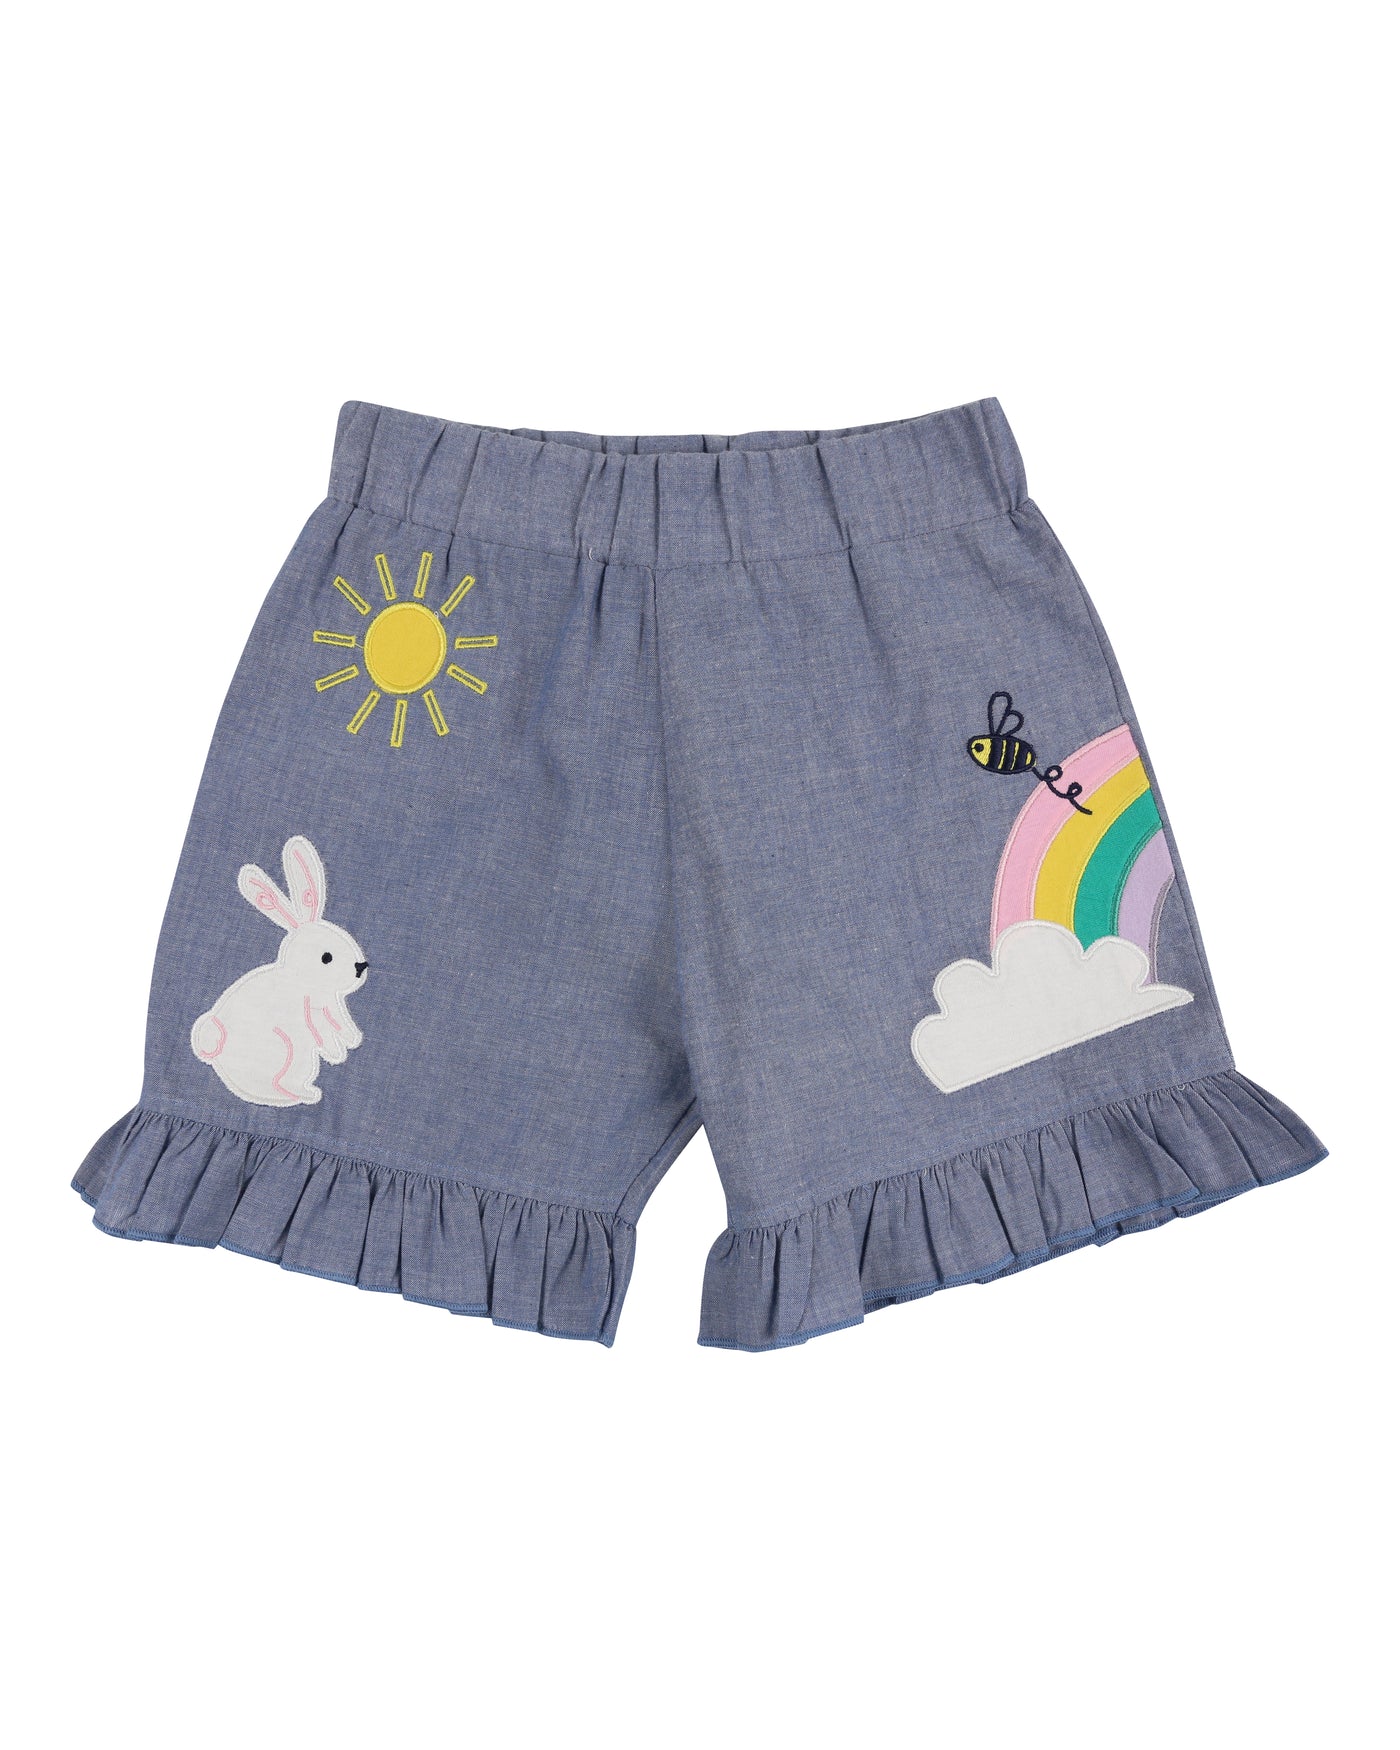 Lilly and Sid Bunny Shorts